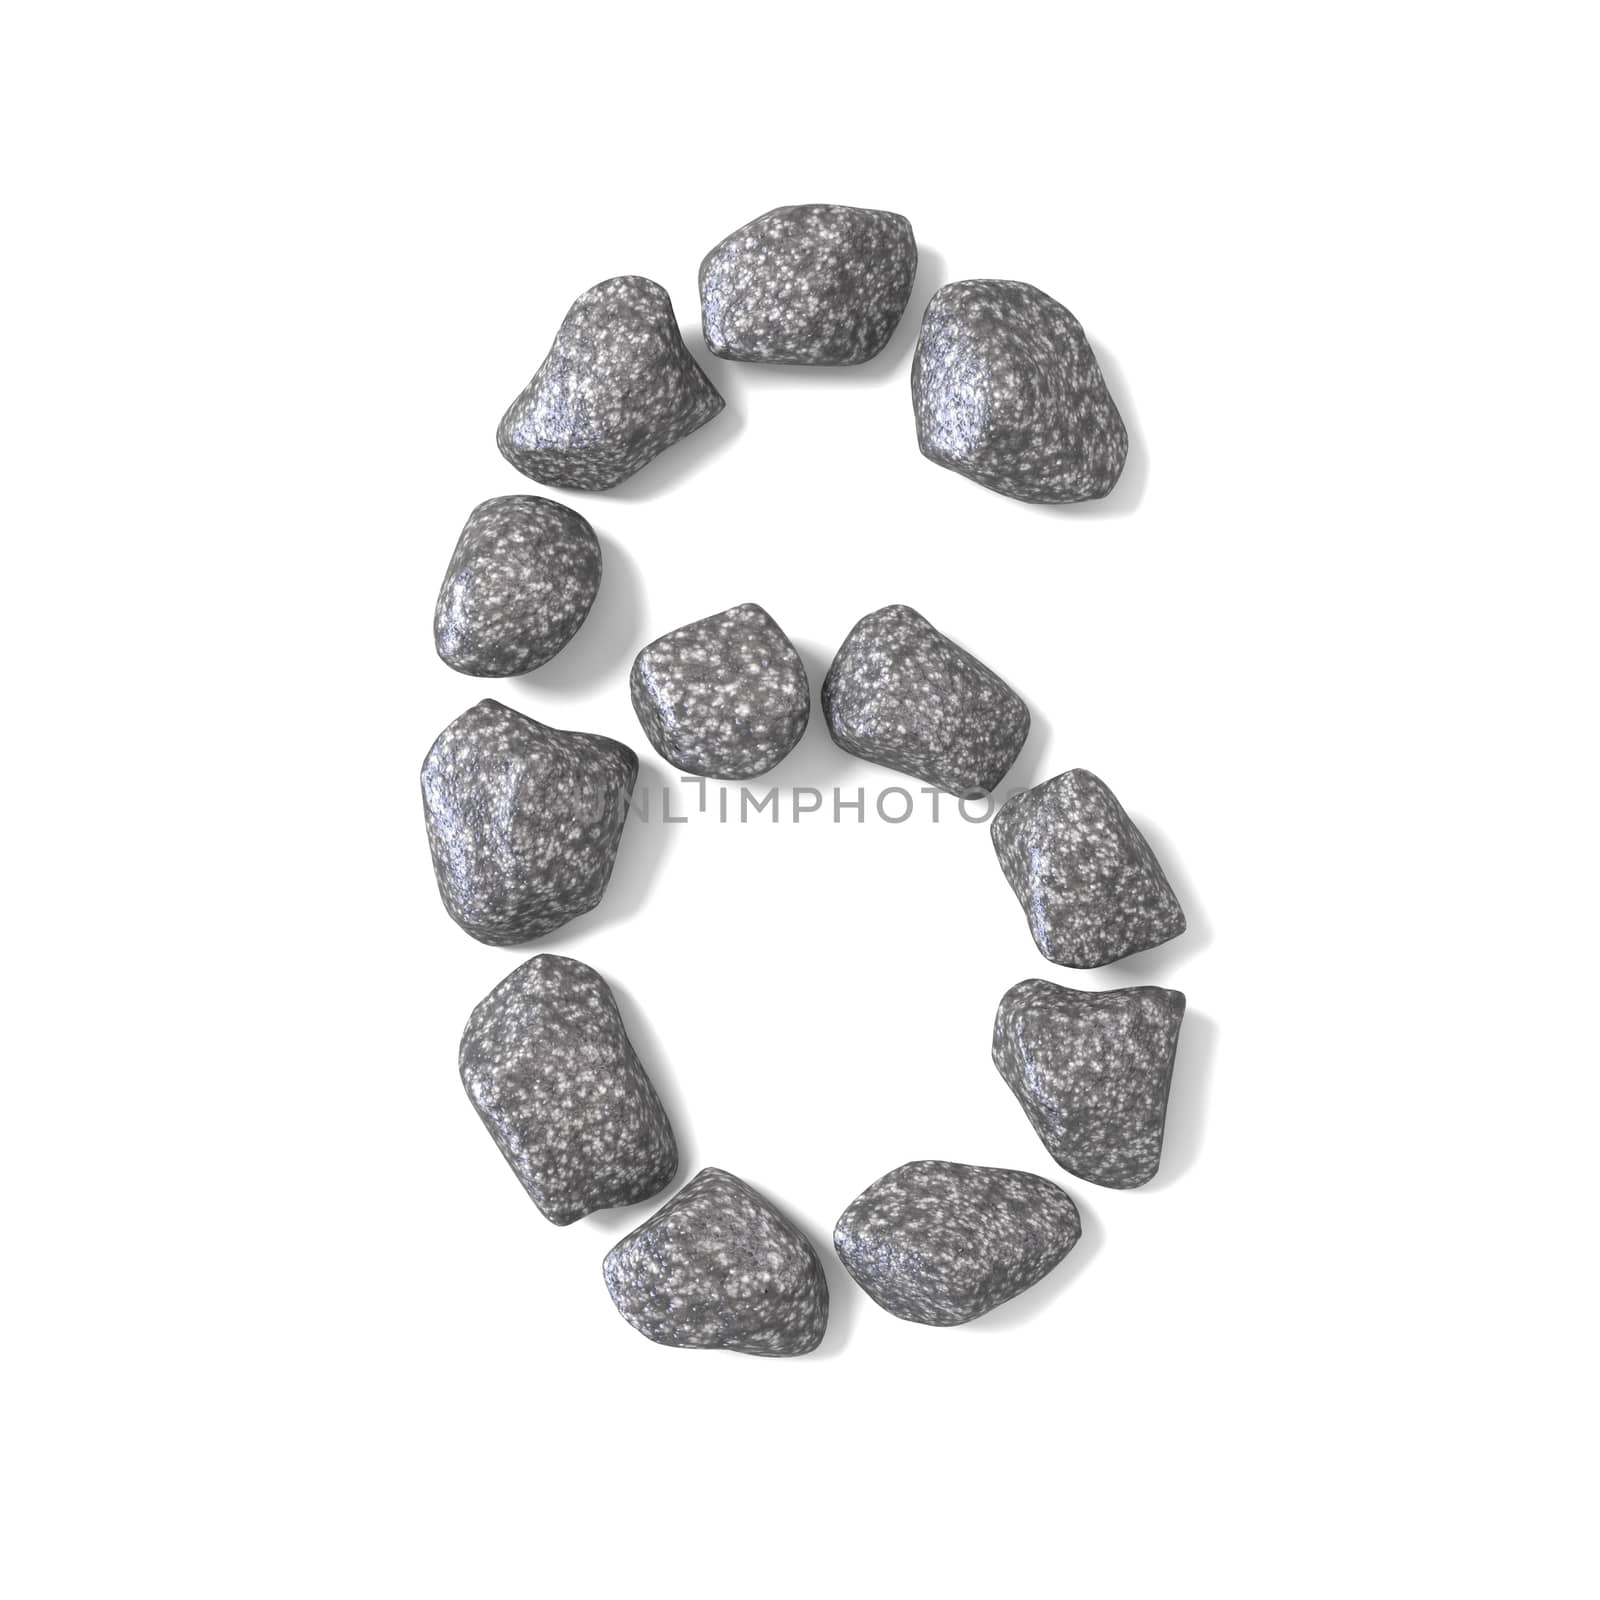 Font made of rocks NUMBER six 6 3D render illustration isolated on white background